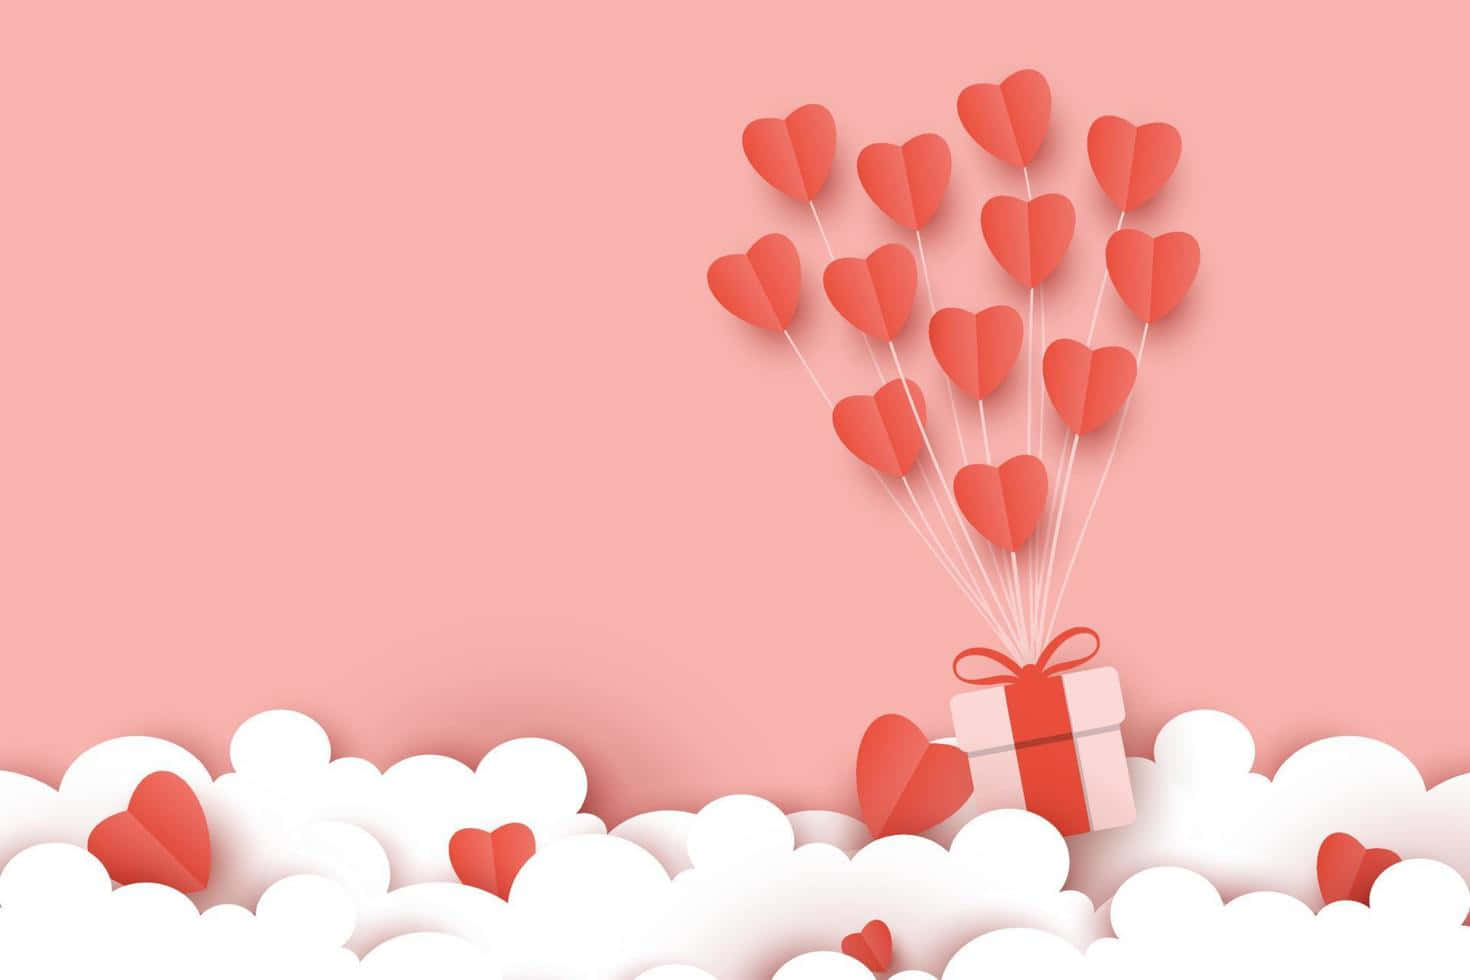 Cute Valentines Day Gift With Heart Balloons Vector Art Wallpaper